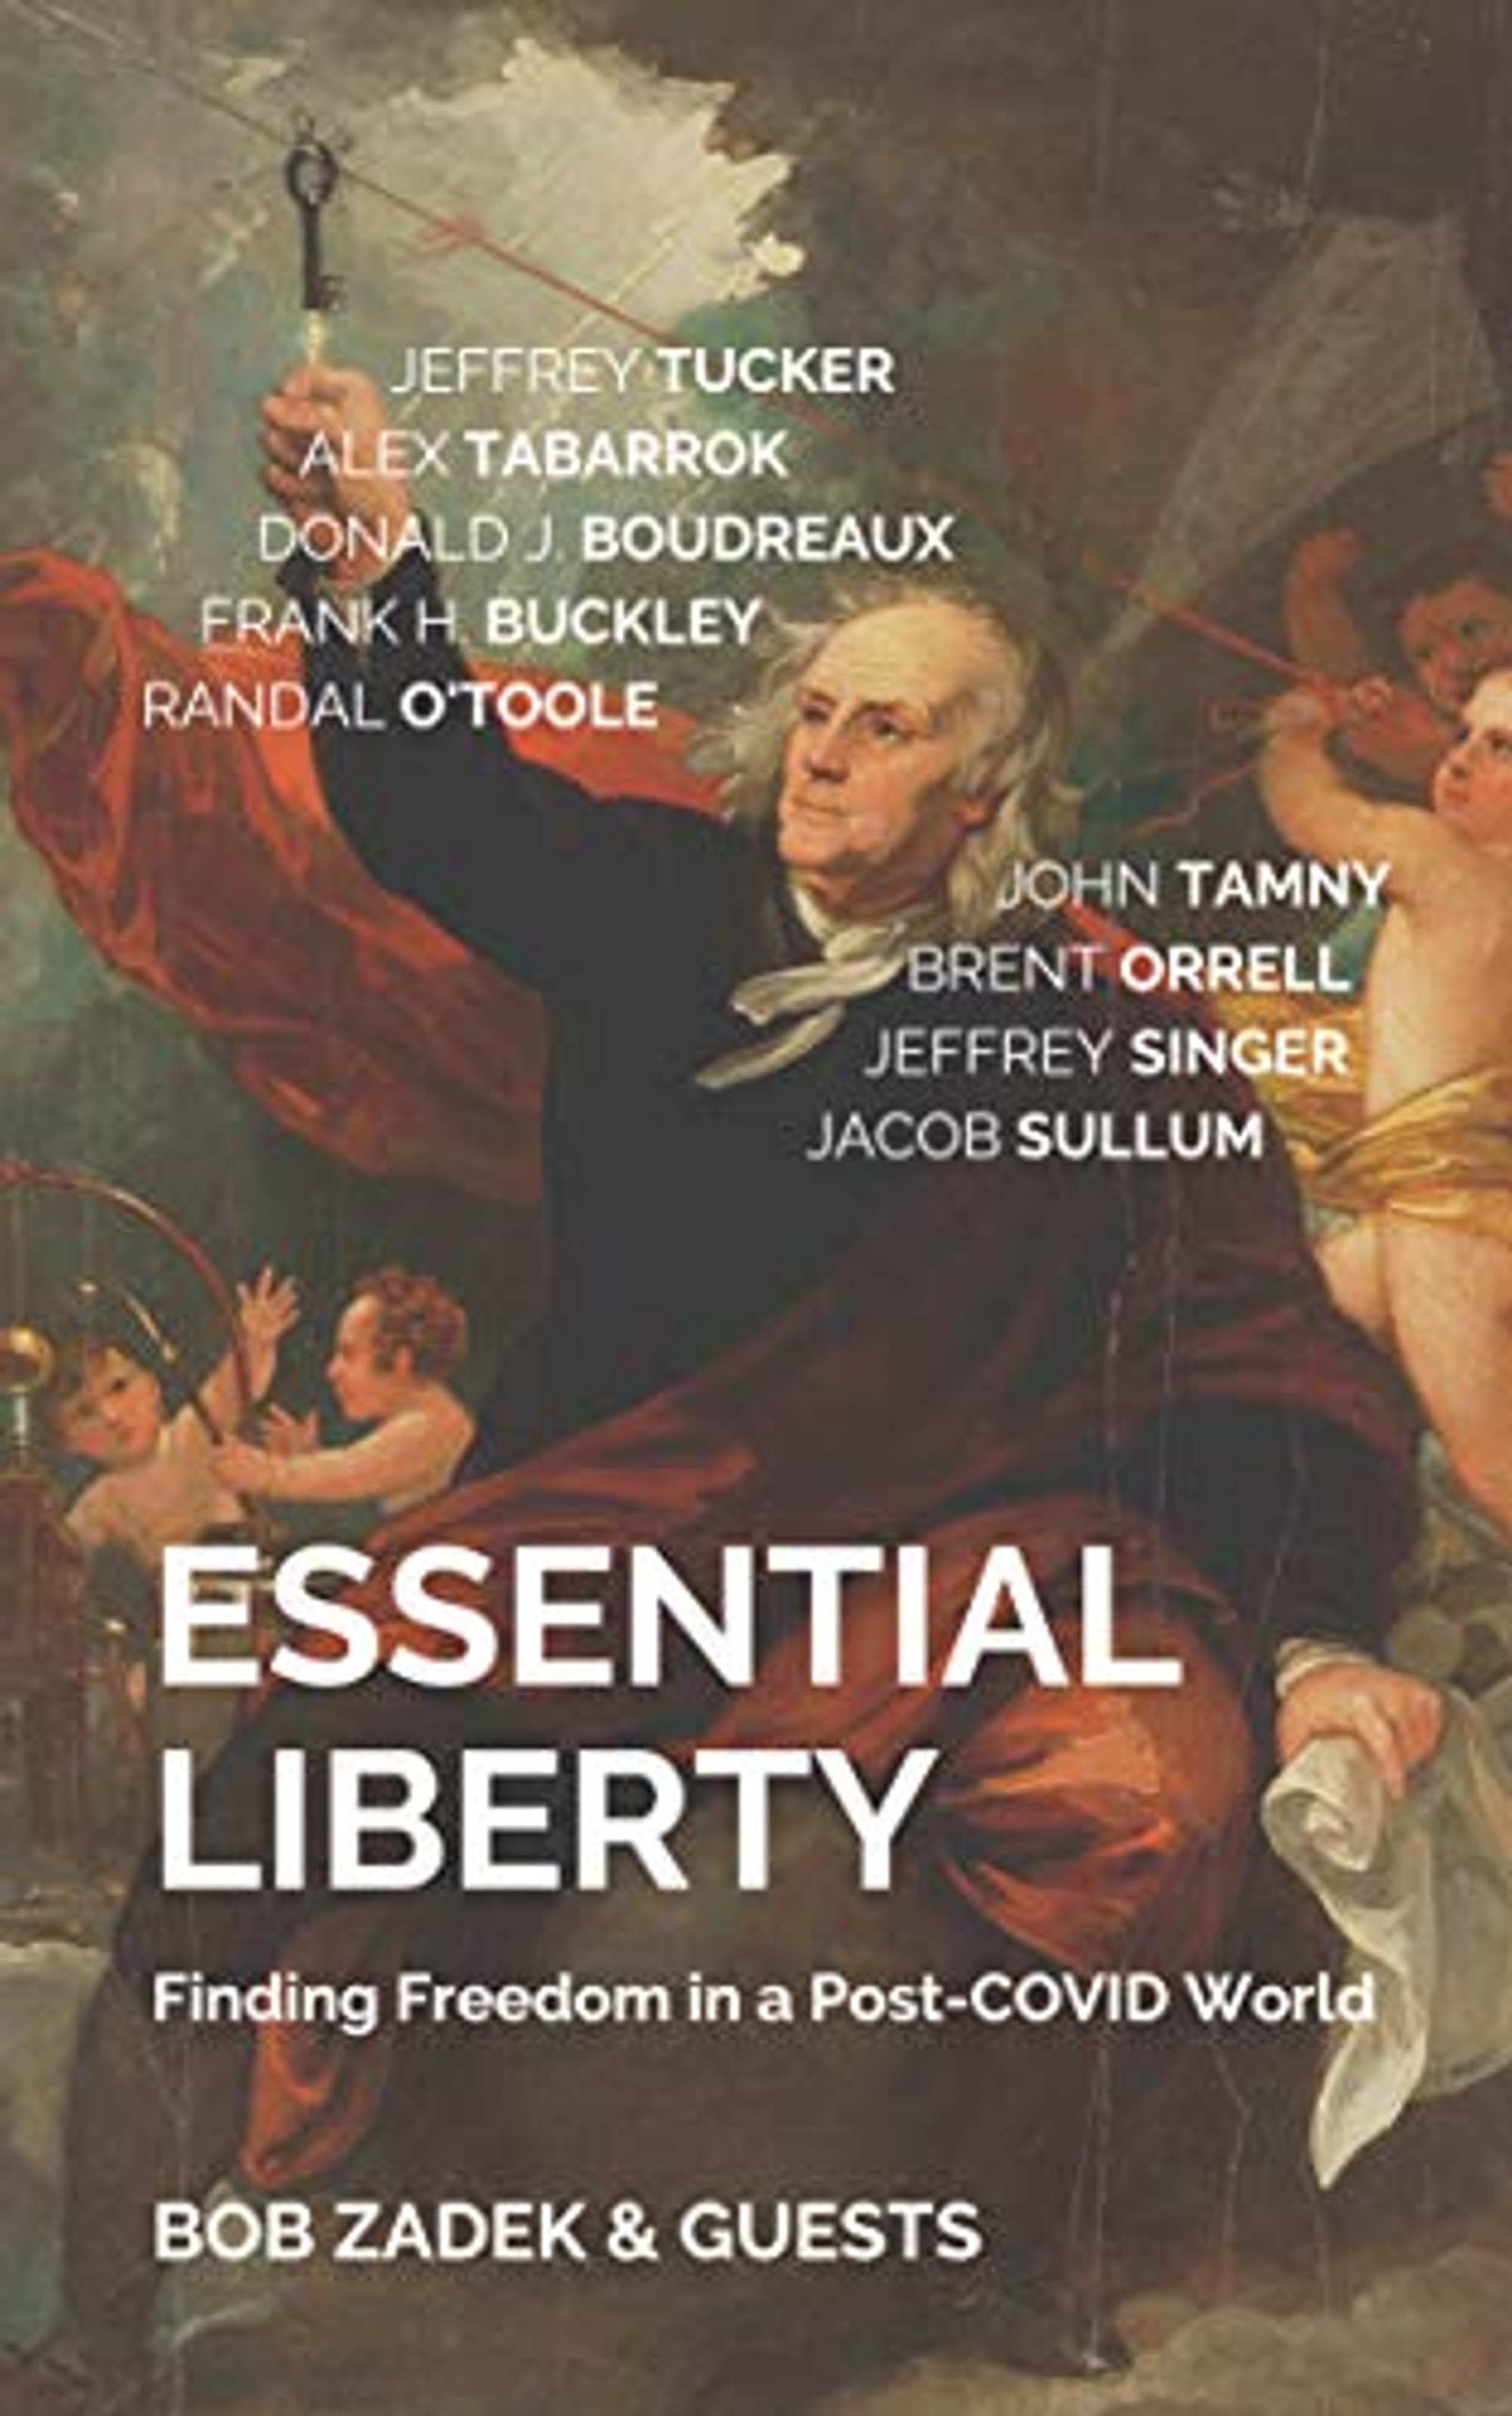 Essential Liberty: Finding Freedom in a Post-COVID World